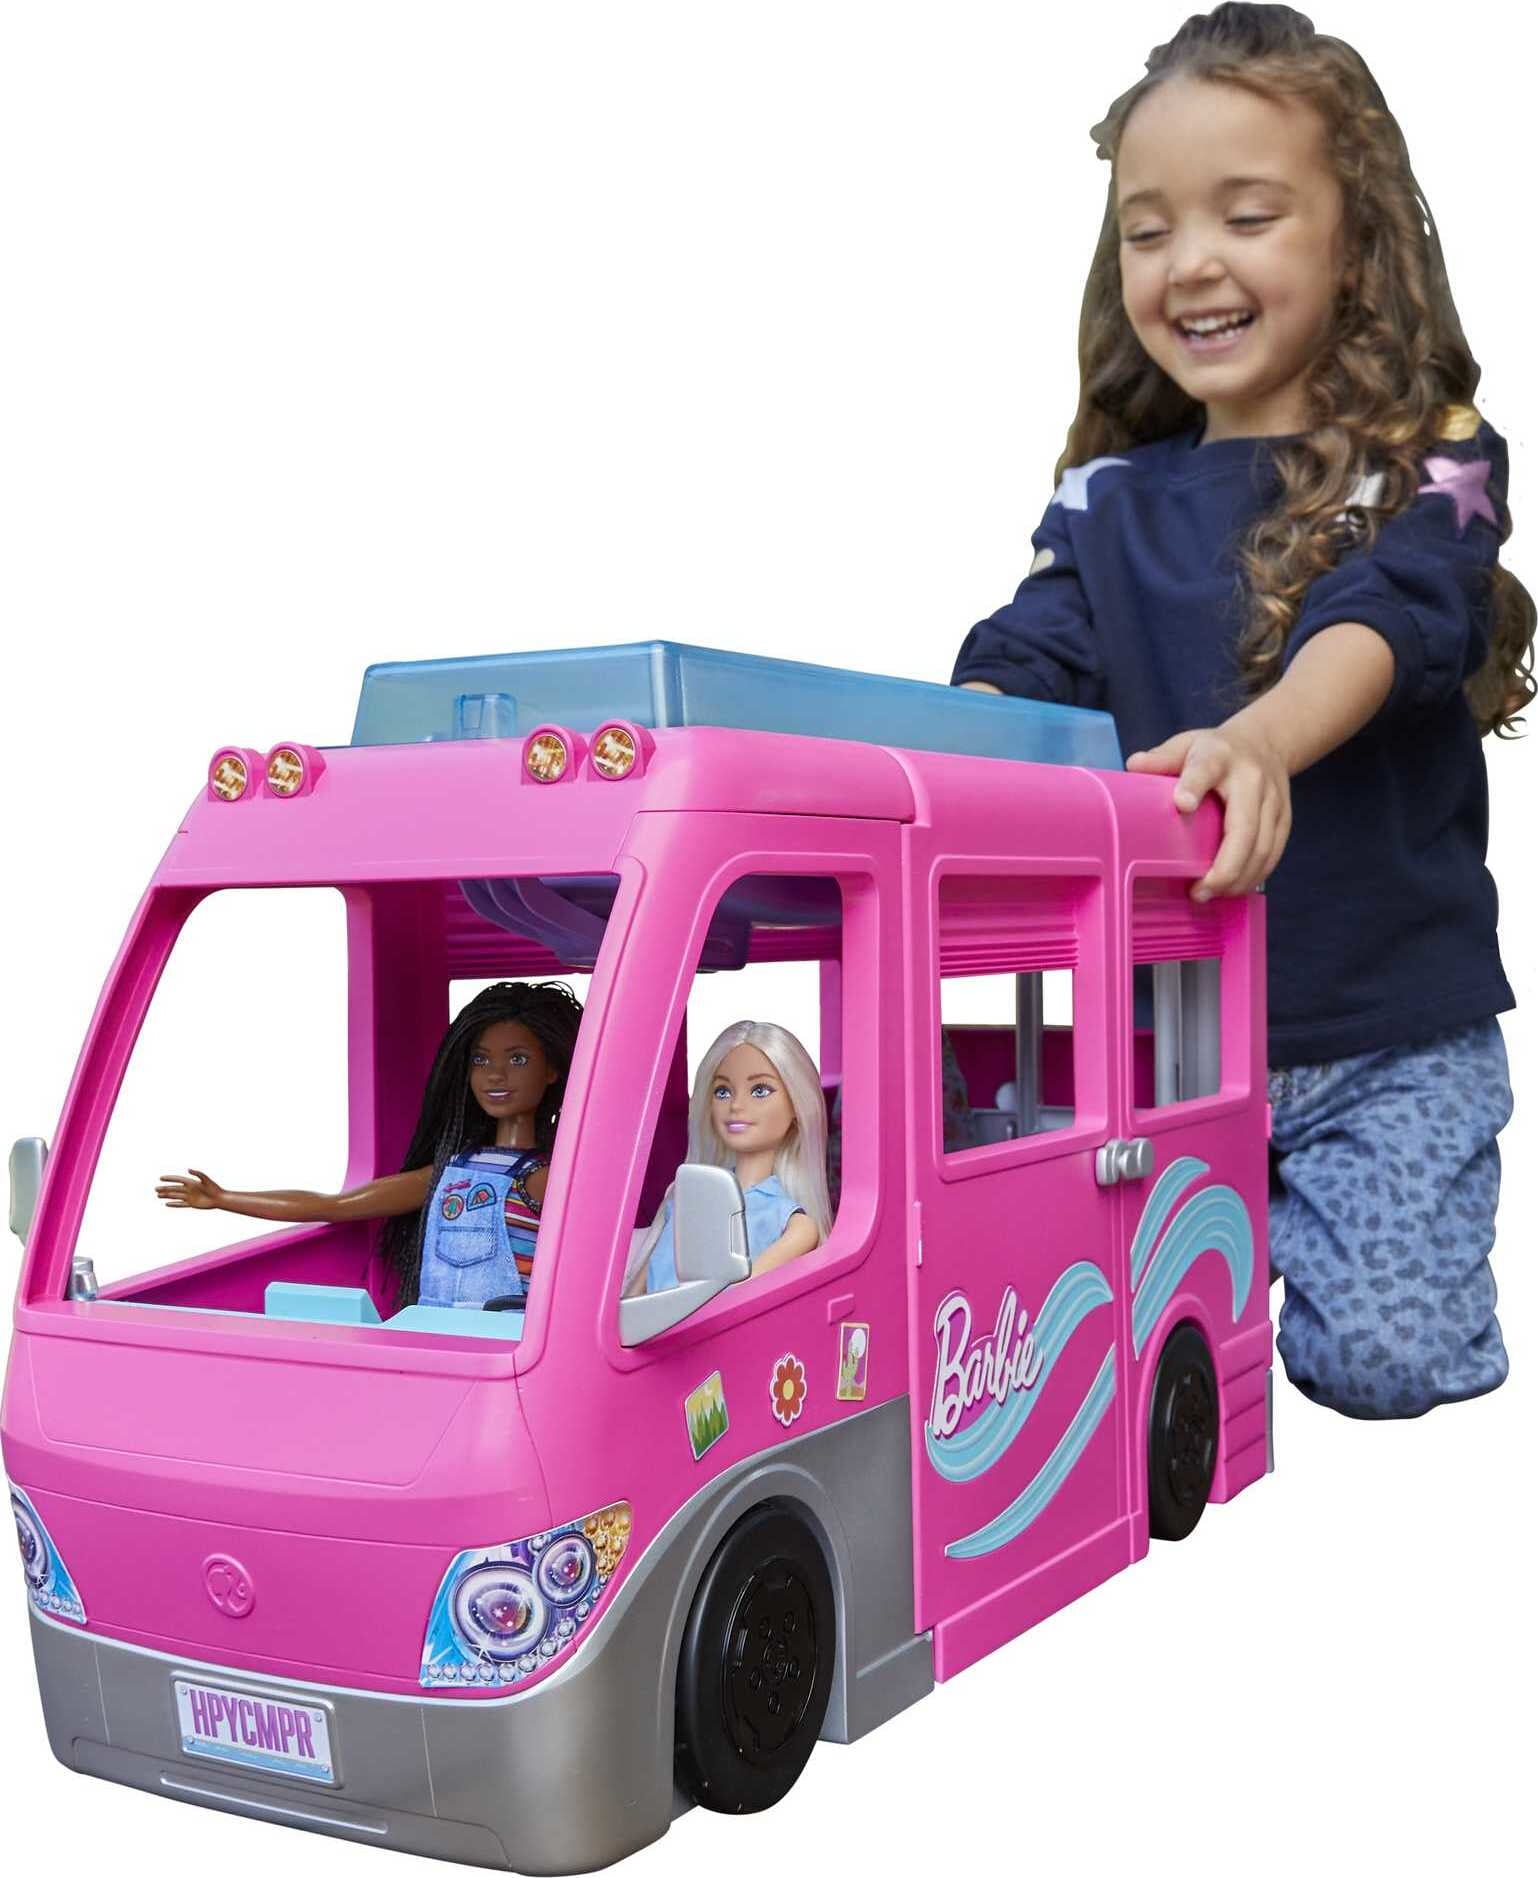 Barbie Playset with 60 Including Pool and 30-inch Slide - Walmart.com